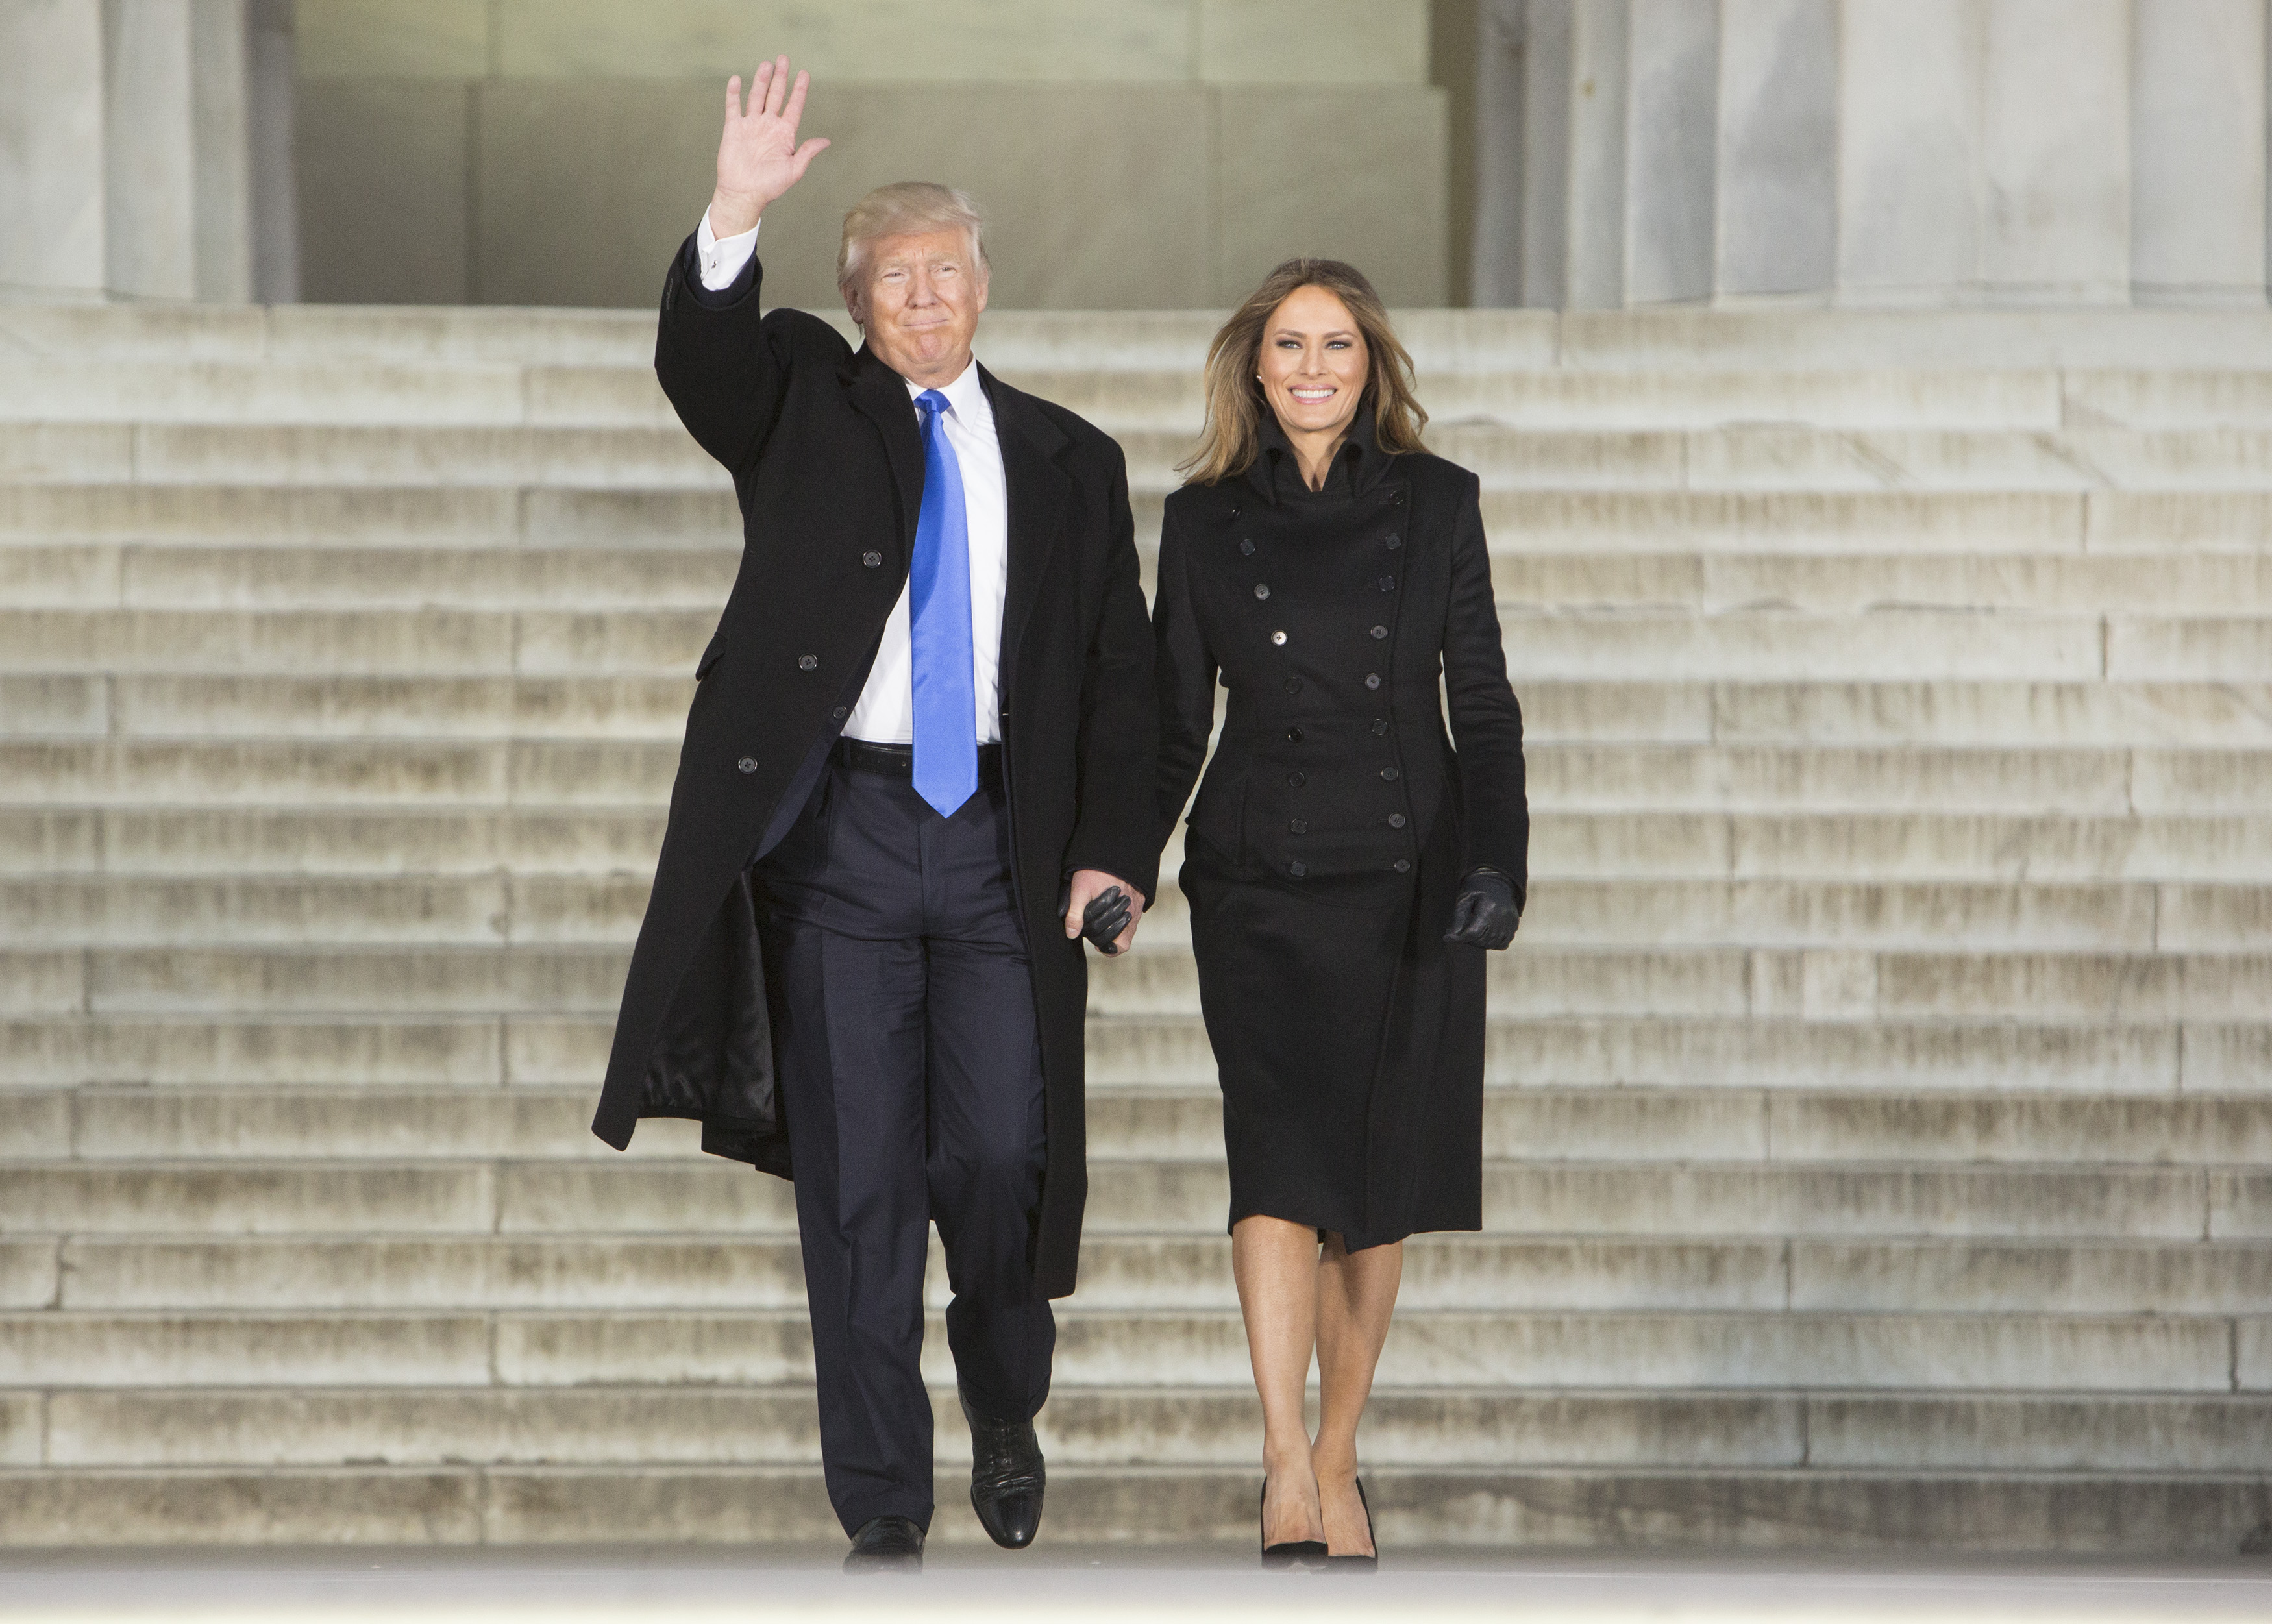 Donald Trump and Melania Trump arrive at the "Make America Great Again Welcome Celebration" concert at the Lincoln Memorial in Washington, D.C. on Jan. 19, 2017. (Chris Kleponis—Getty Images)